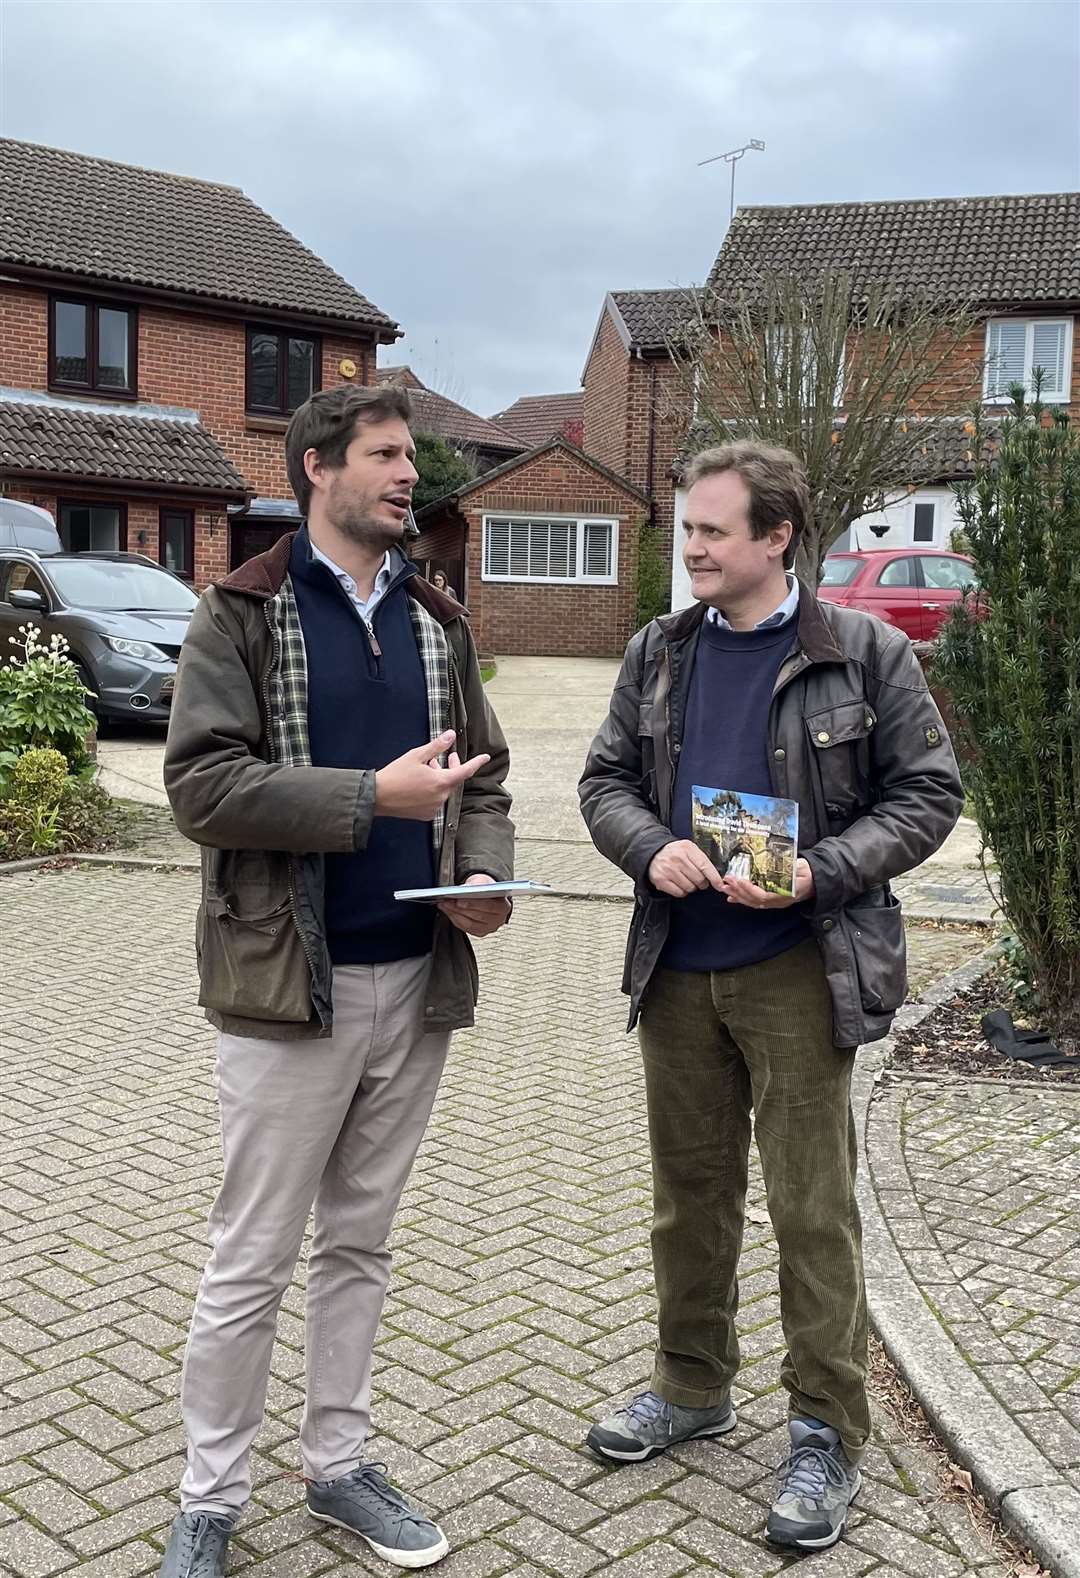 West Malling parish councillor David Thompson with Tonbridge and Malling MP Tom Tugendhat. Picture: David Thompson